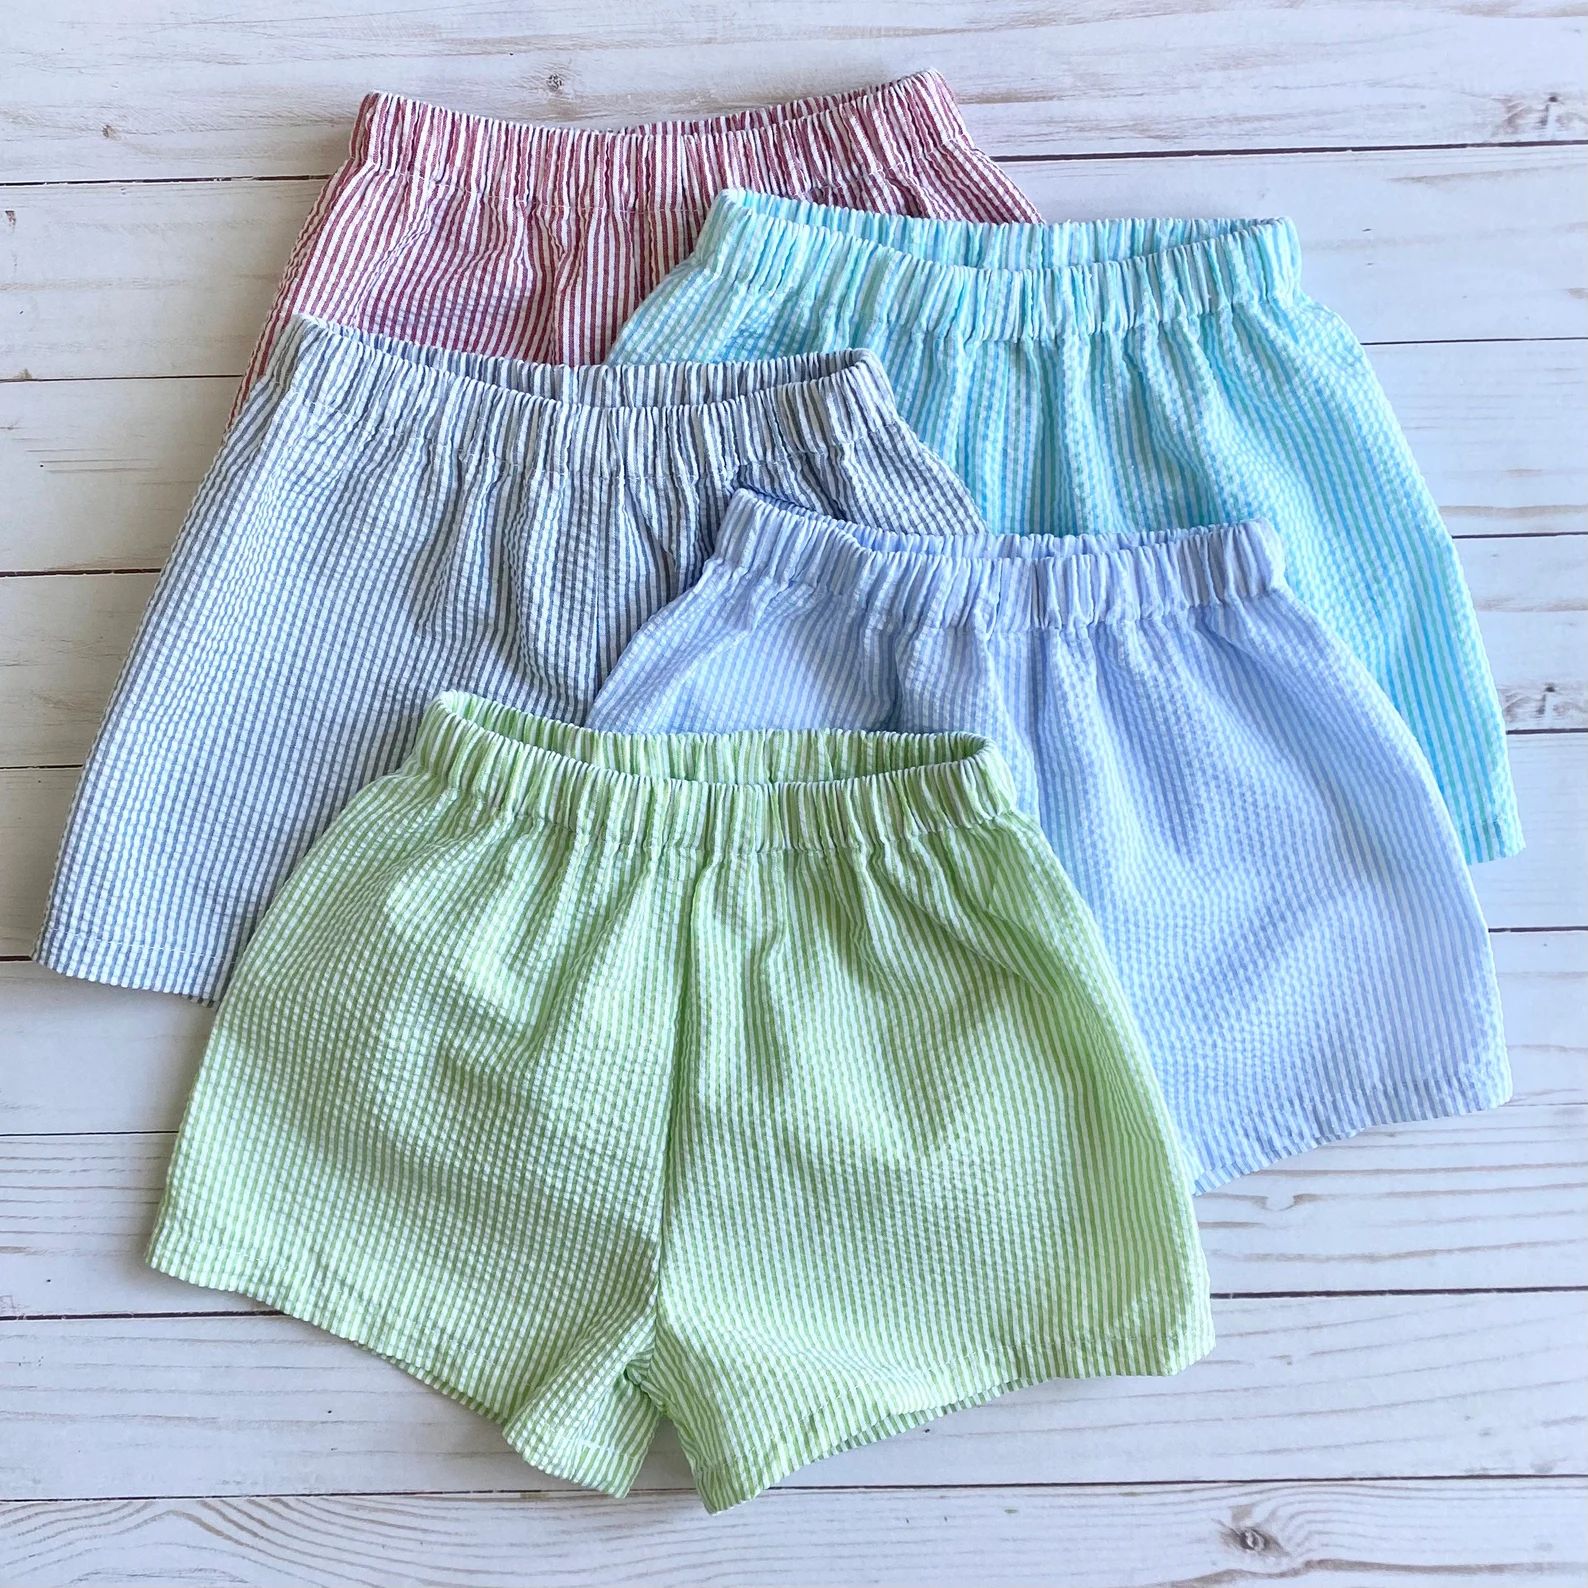 Seersucker shorts for children / Size newborn to 10 years old / Short length and Knee length | Etsy (US)